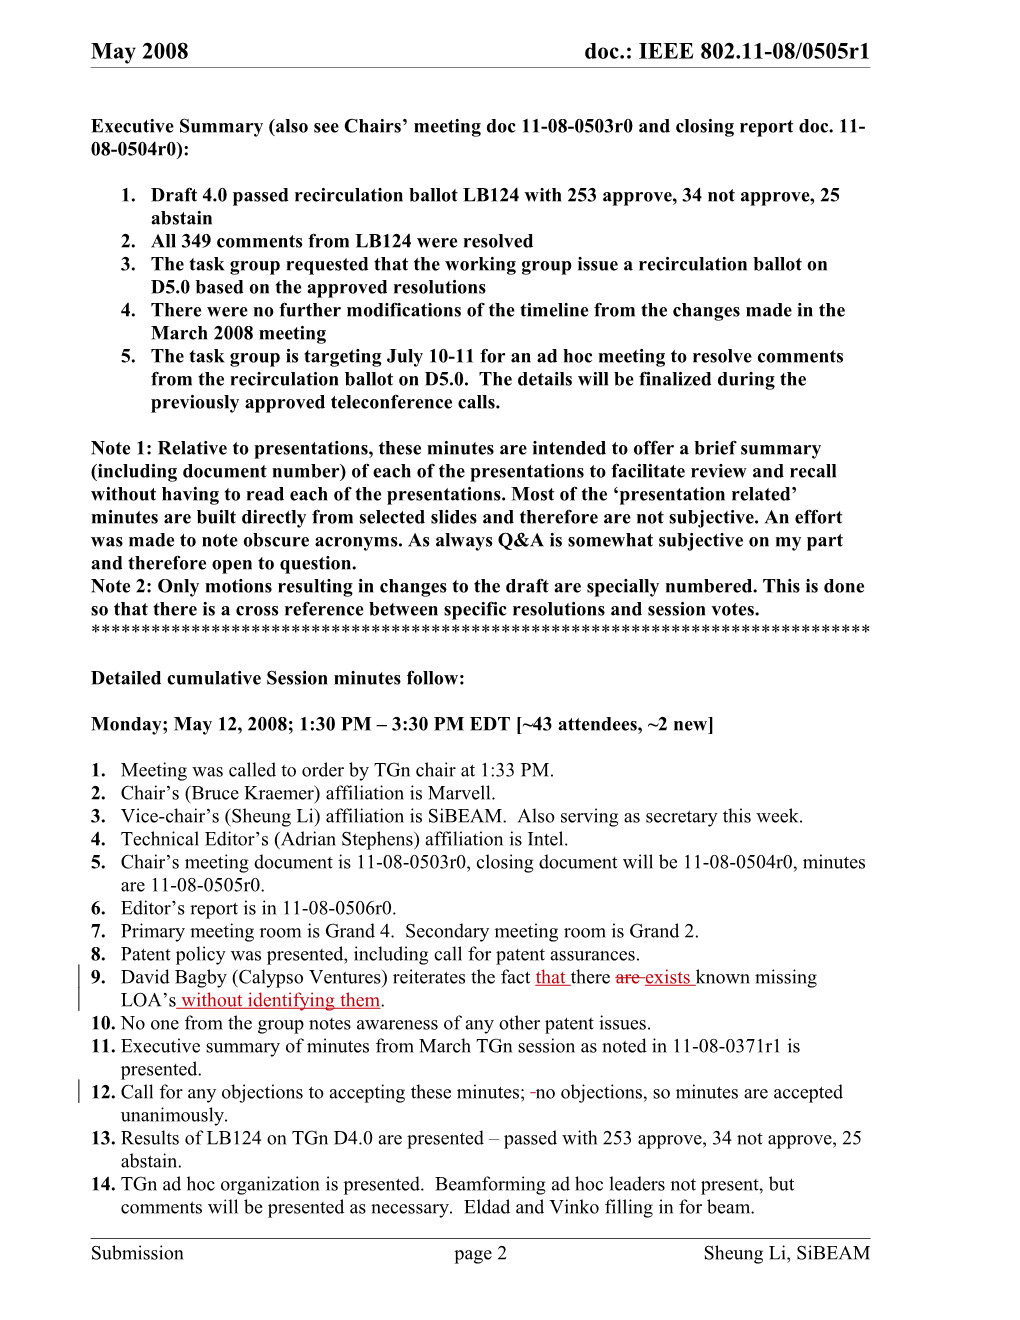 Executive Summary (Also See Chairs Meeting Doc 11-08-0503R0 and Closing Report Doc